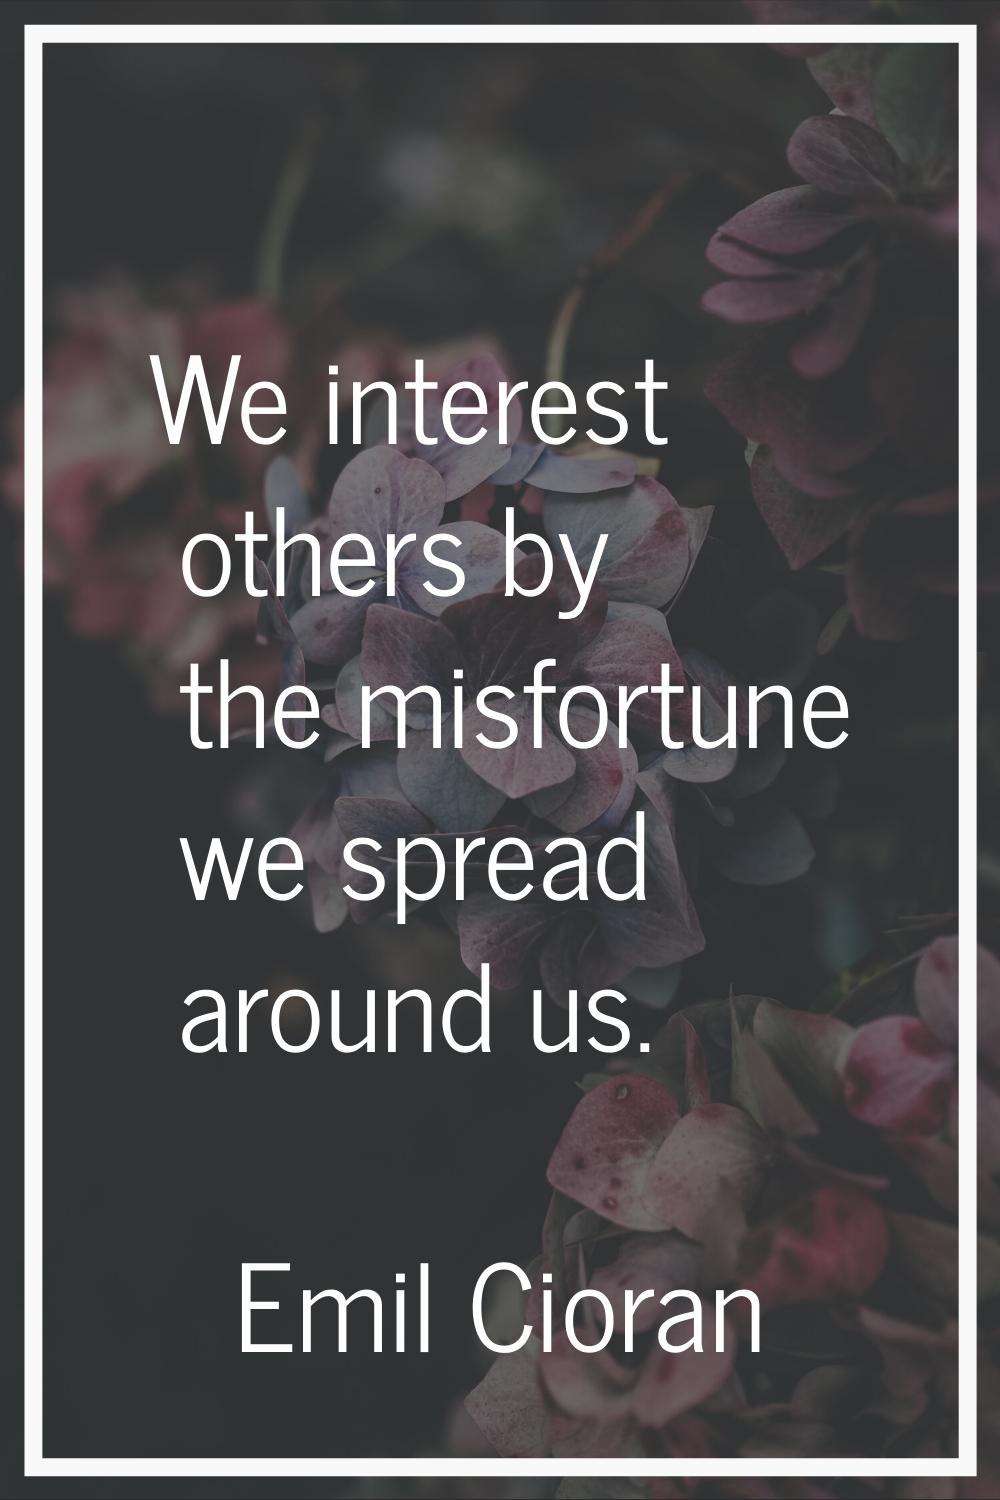 We interest others by the misfortune we spread around us.